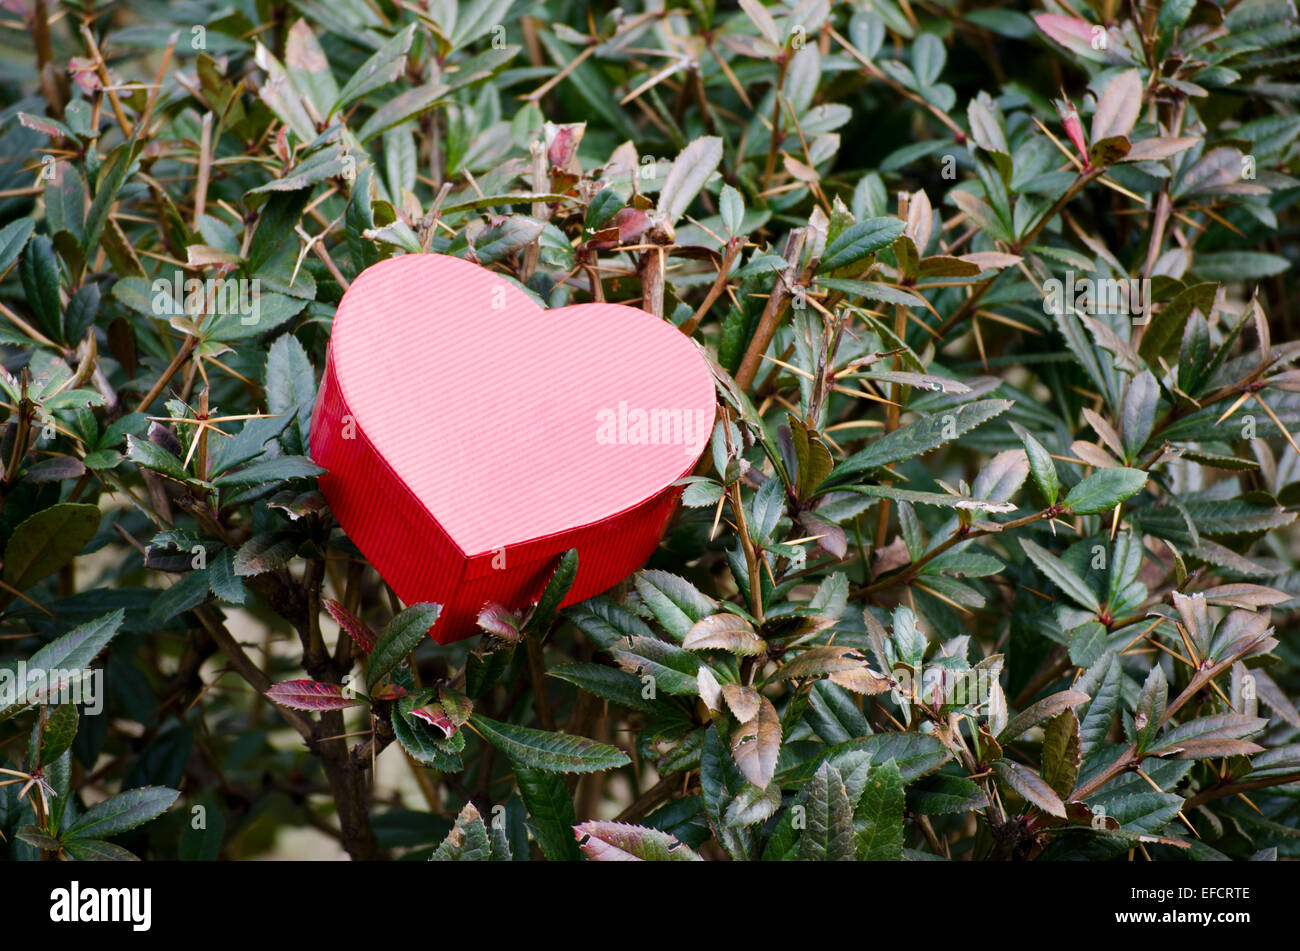 Red heart shaped box placed among the bushes Stock Photo